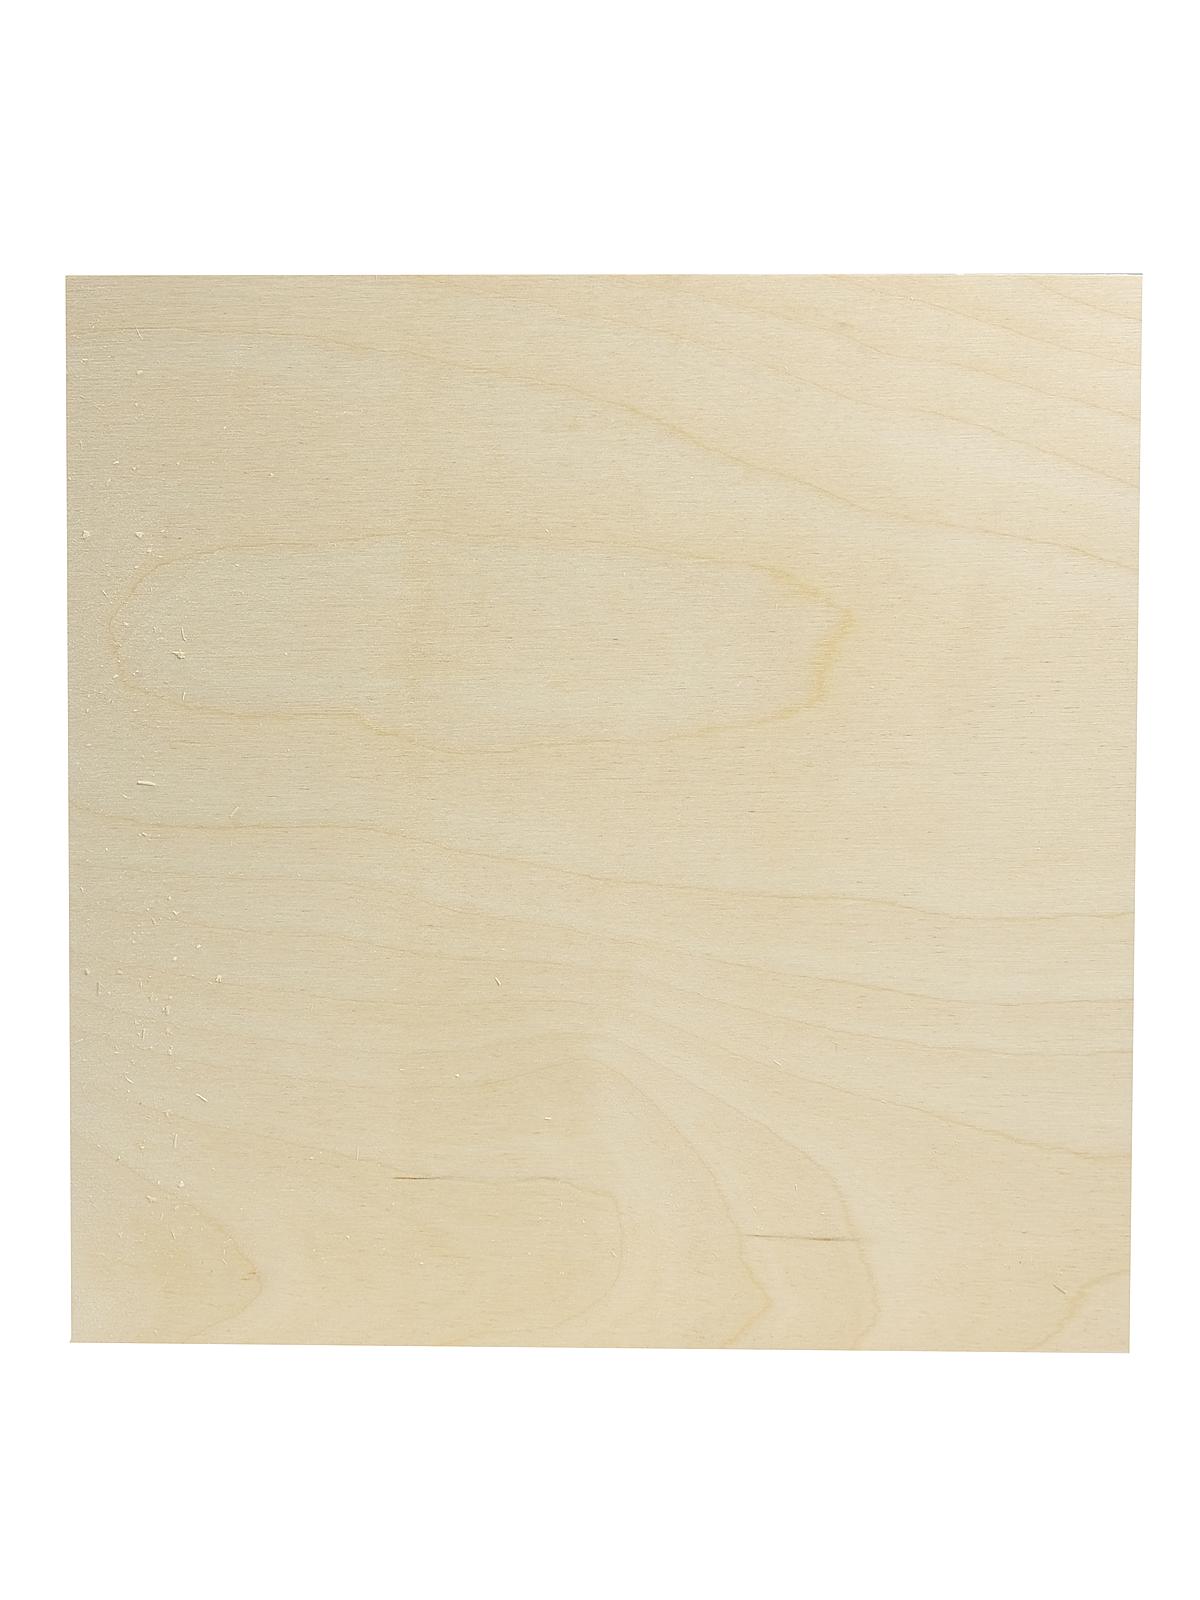 1 5 8 In. Cradled Wood Painting Panels 10 In. X 10 In.